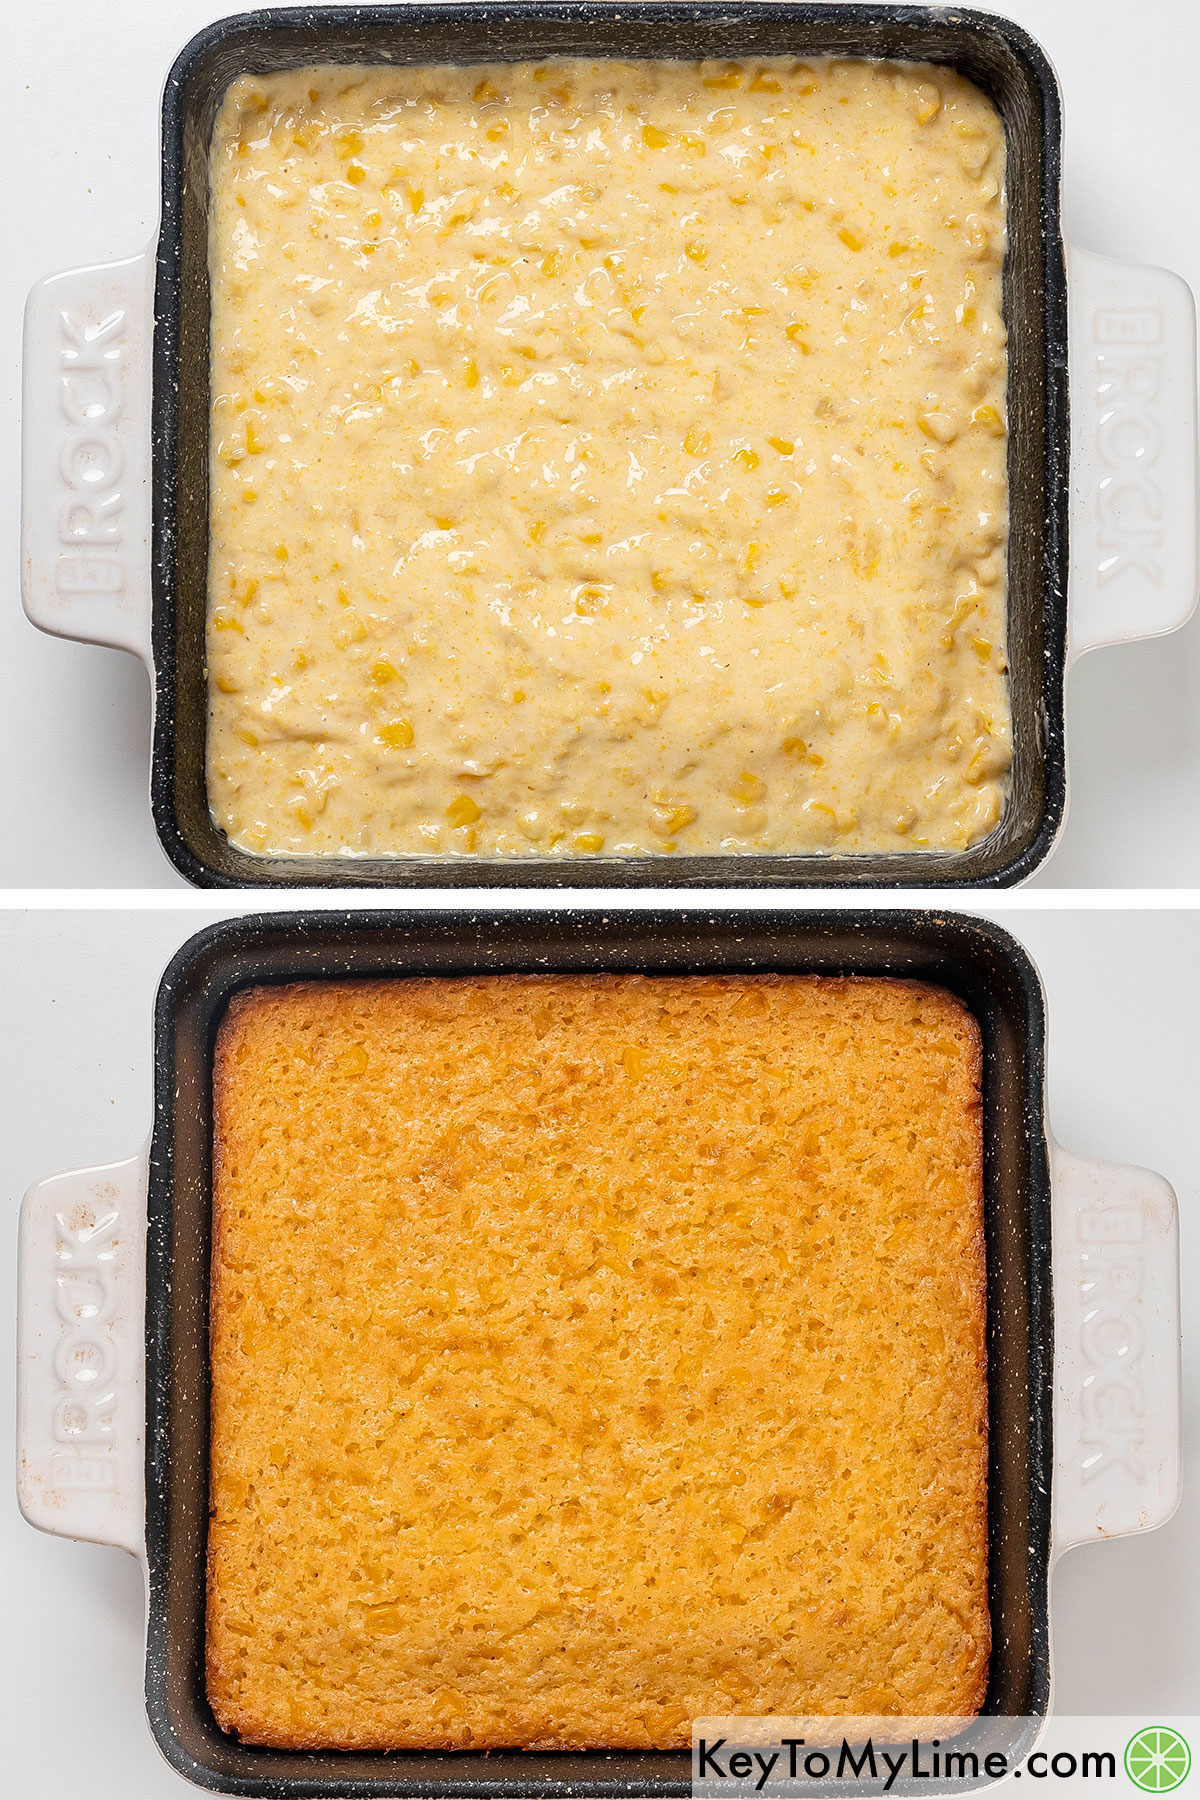 Once the oven is preheated baking the casserole until all the edges and top are golden brown.